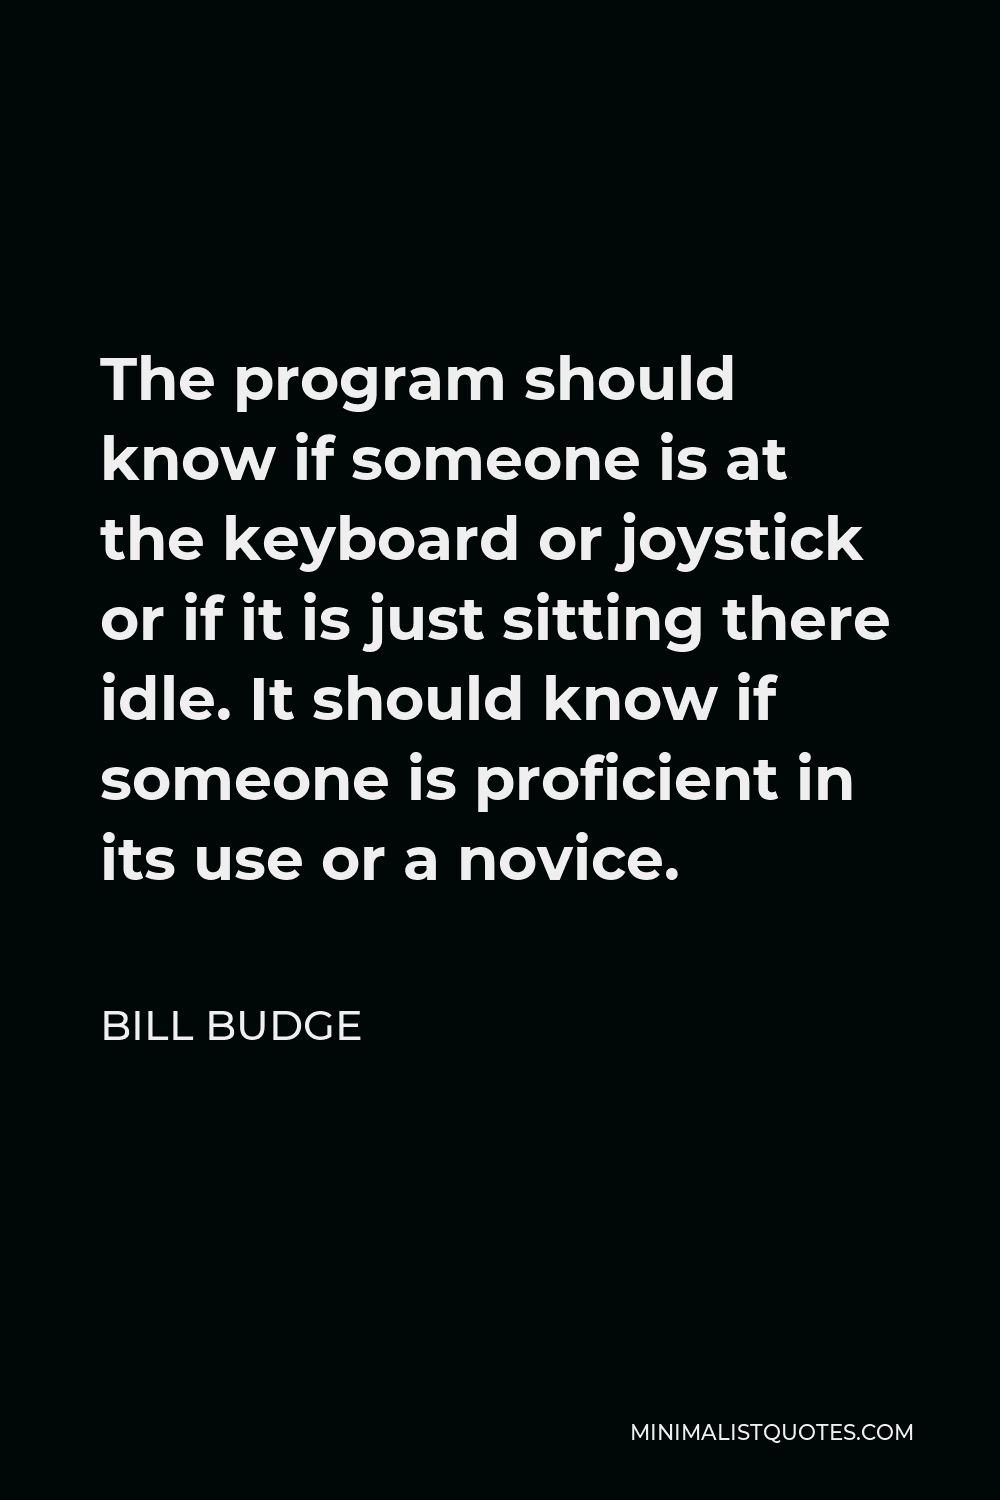 Bill Budge Quote - The program should know if someone is at the keyboard or joystick or if it is just sitting there idle. It should know if someone is proficient in its use or a novice.